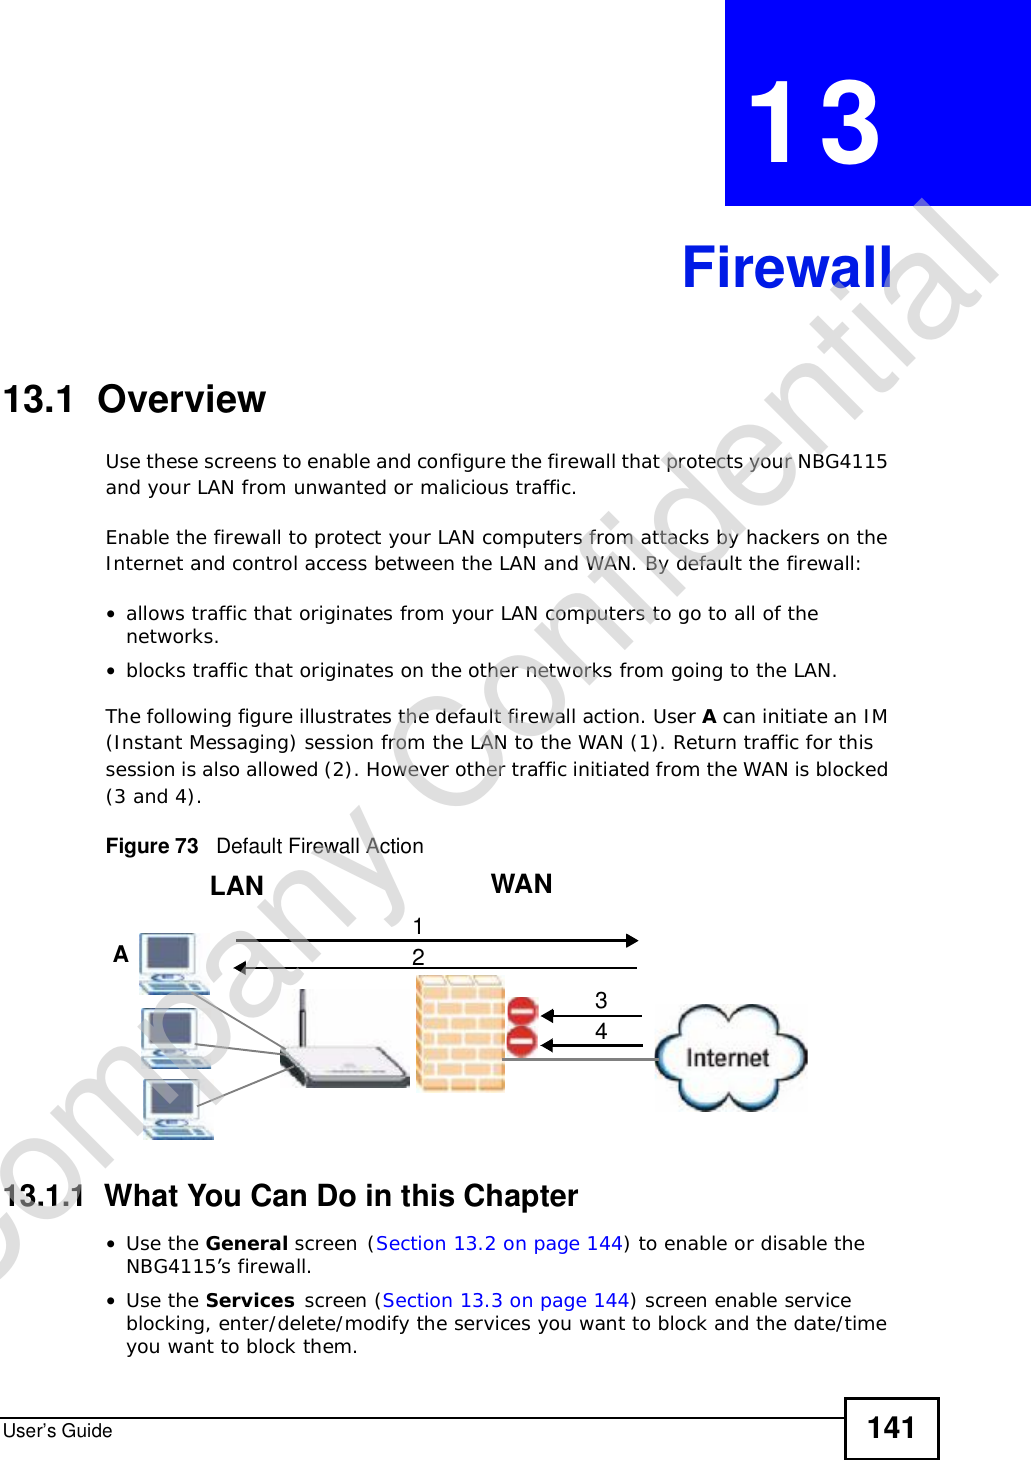 User’s Guide 141CHAPTER 13Firewall13.1  OverviewUse these screens to enable and configure the firewall that protects your NBG4115 and your LAN from unwanted or malicious traffic.Enable the firewall to protect your LAN computers from attacks by hackers on the Internet and control access between the LAN and WAN. By default the firewall:•allows traffic that originates from your LAN computers to go to all of the networks. •blocks traffic that originates on the other networks from going to the LAN. The following figure illustrates the default firewall action. User A can initiate an IM (Instant Messaging) session from the LAN to the WAN (1). Return traffic for this session is also allowed (2). However other traffic initiated from the WAN is blocked (3 and 4).Figure 73   Default Firewall Action13.1.1  What You Can Do in this Chapter•Use the General screen(Section 13.2 on page 144) to enable or disable the NBG4115’s firewall.•Use the Services screen (Section 13.3 on page 144) screen enable service blocking, enter/delete/modify the services you want to block and the date/time you want to block them. WANLAN3412ACompany Confidential